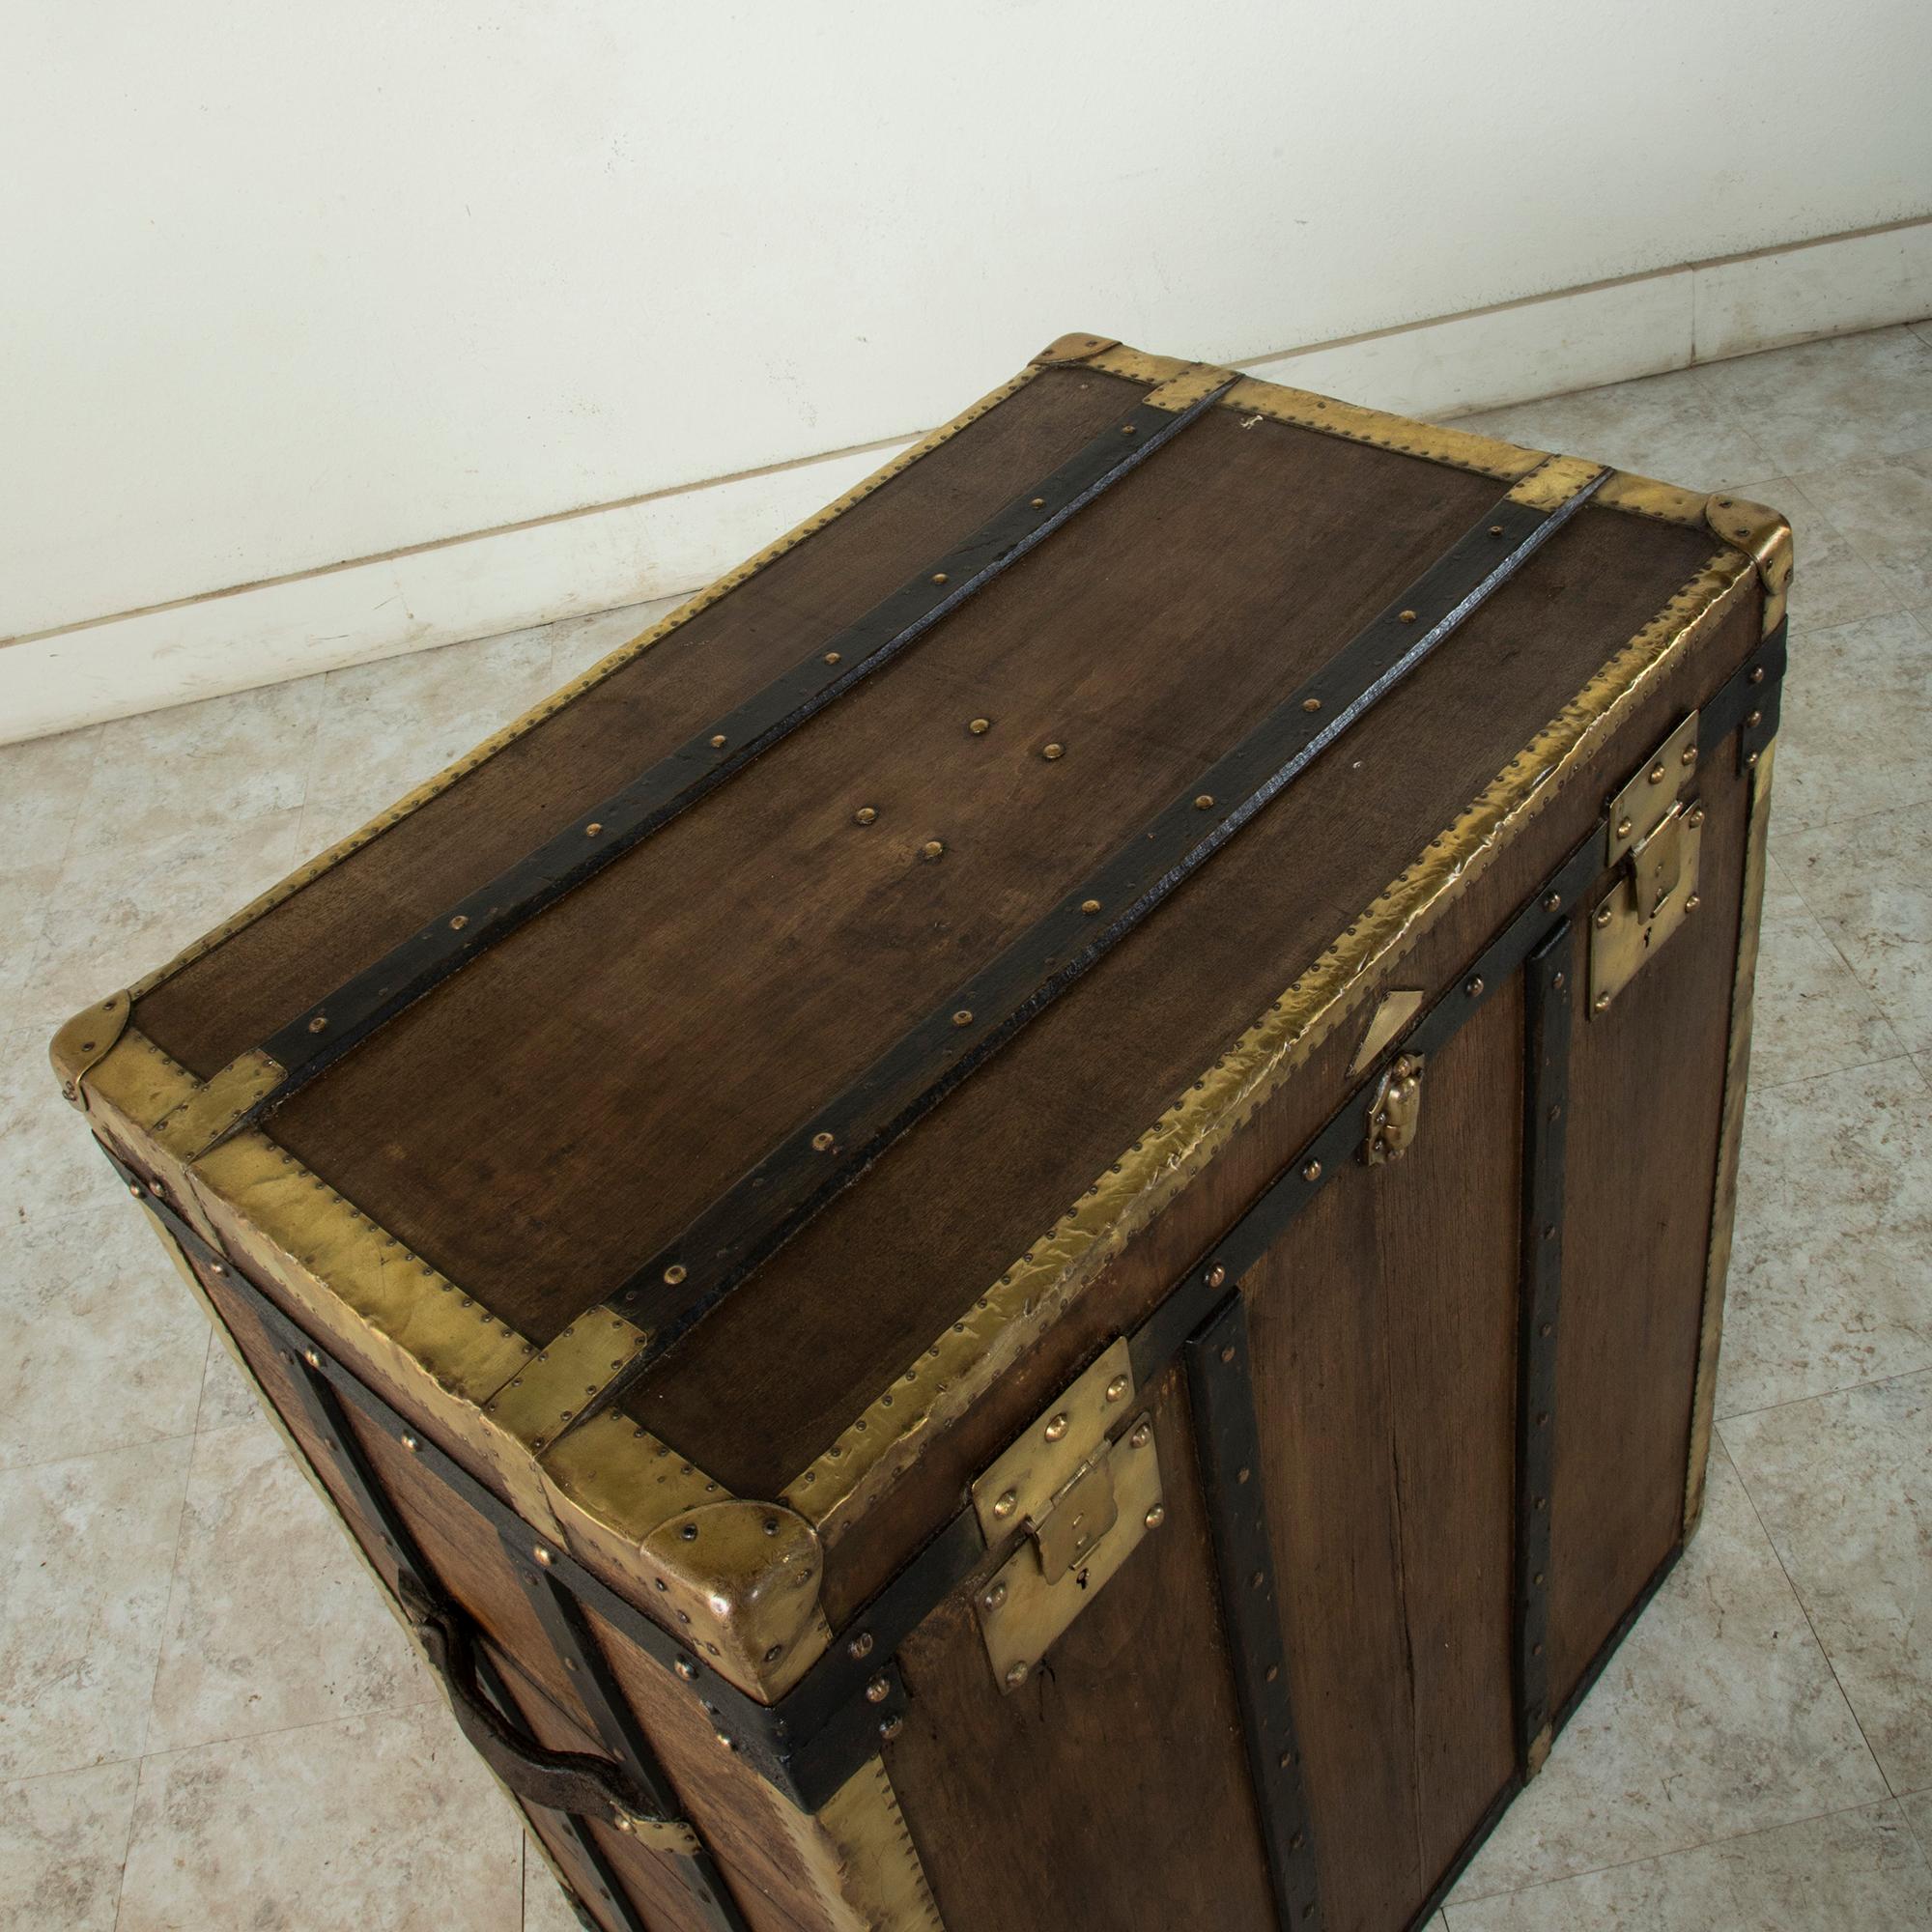 Brass Tall Early 20th Century French Beech Wood Steamer Trunk by Malard, E&M in Paris